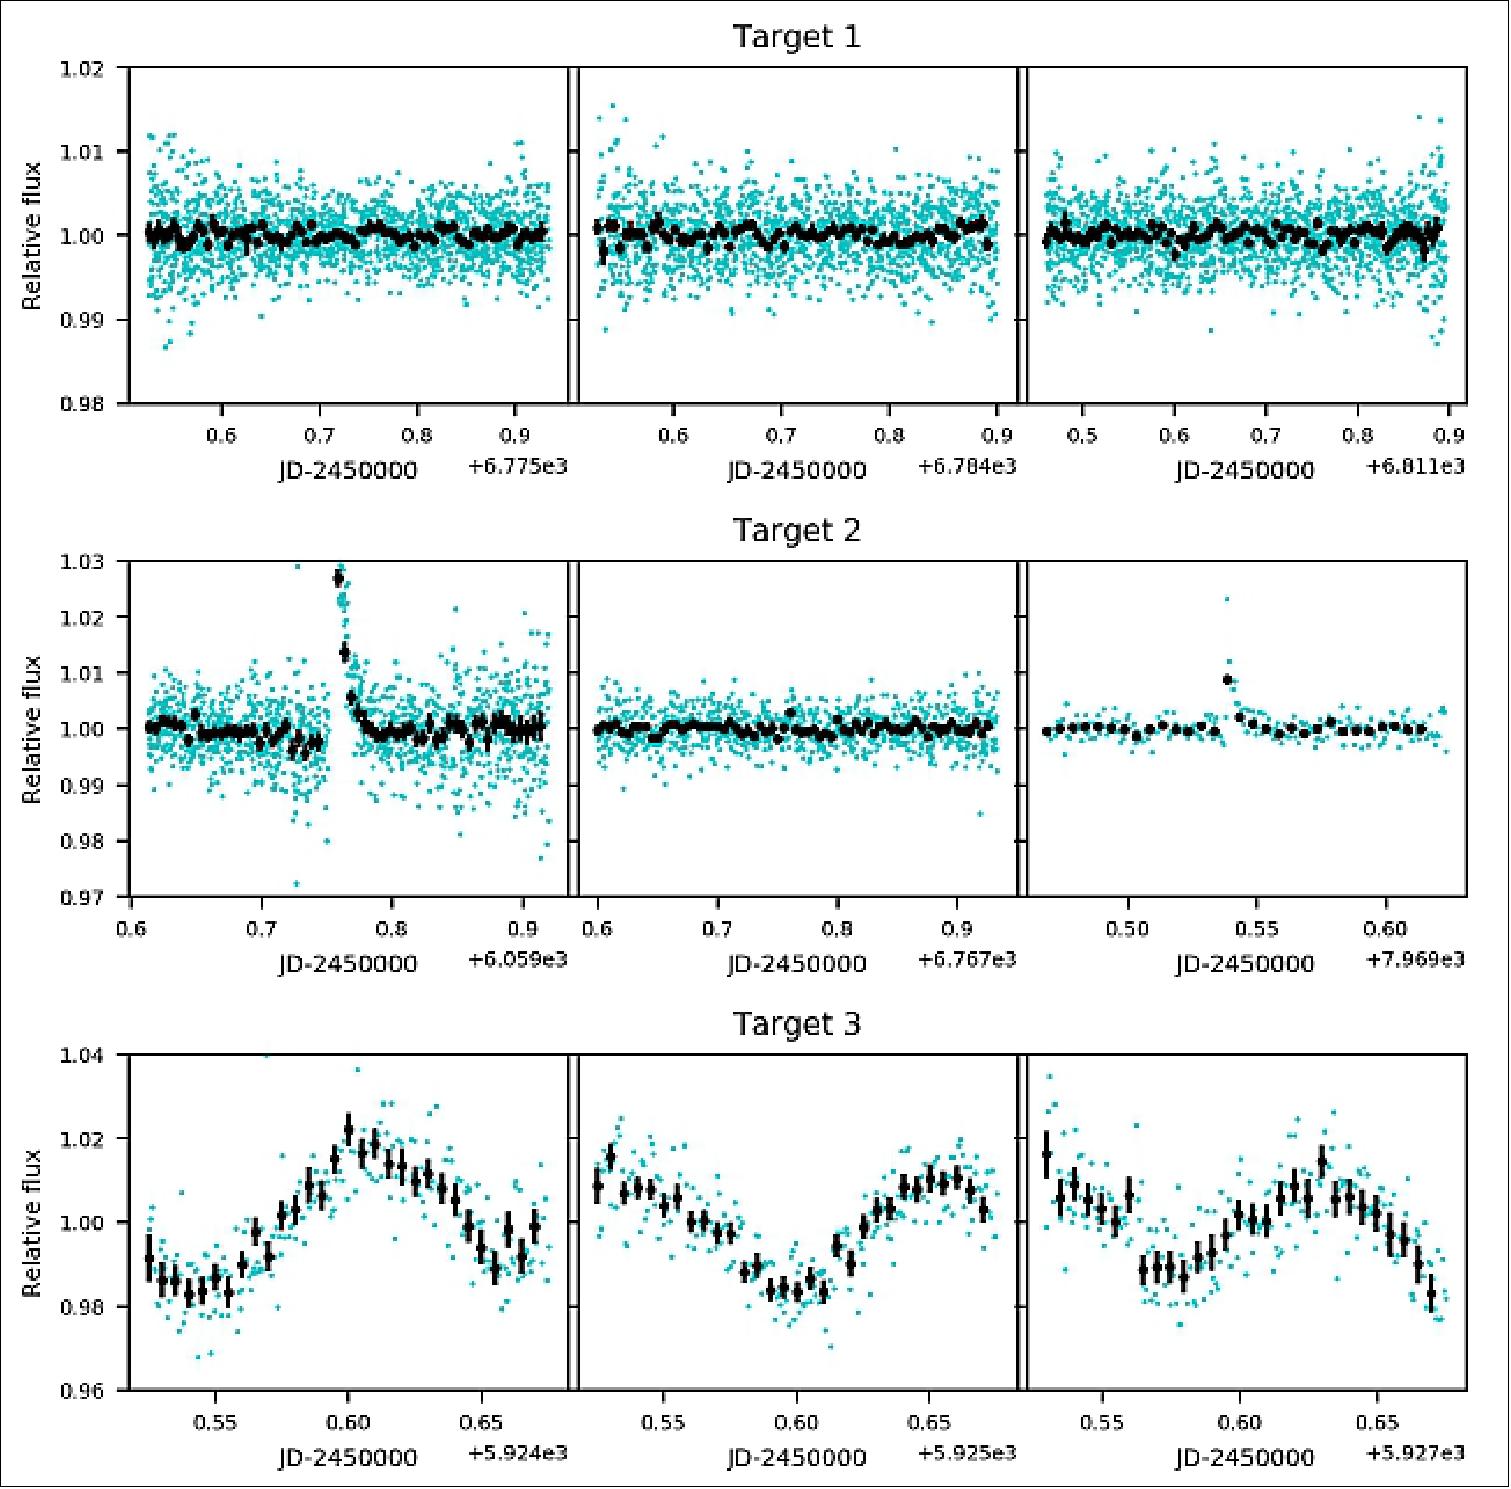 Figure 3: Typical TRAPPIST-South light curves of UCDs obtained as part of our prototype survey. We consider 3 different UCDs and present for each of them 3 light curves, obtained over different nights. For each light curve, the measurements are shown unbinned (cyan points) and binned per 7.2 min (black points with error bars). The first target (top) shows rather flat light curves. The second one (middle) shows clear flares in some light curves (see the first and third light curves shown here). The last target (bottom) shows some rotational modulation with an amplitude of ~4% and a period of ~2.8 hours.